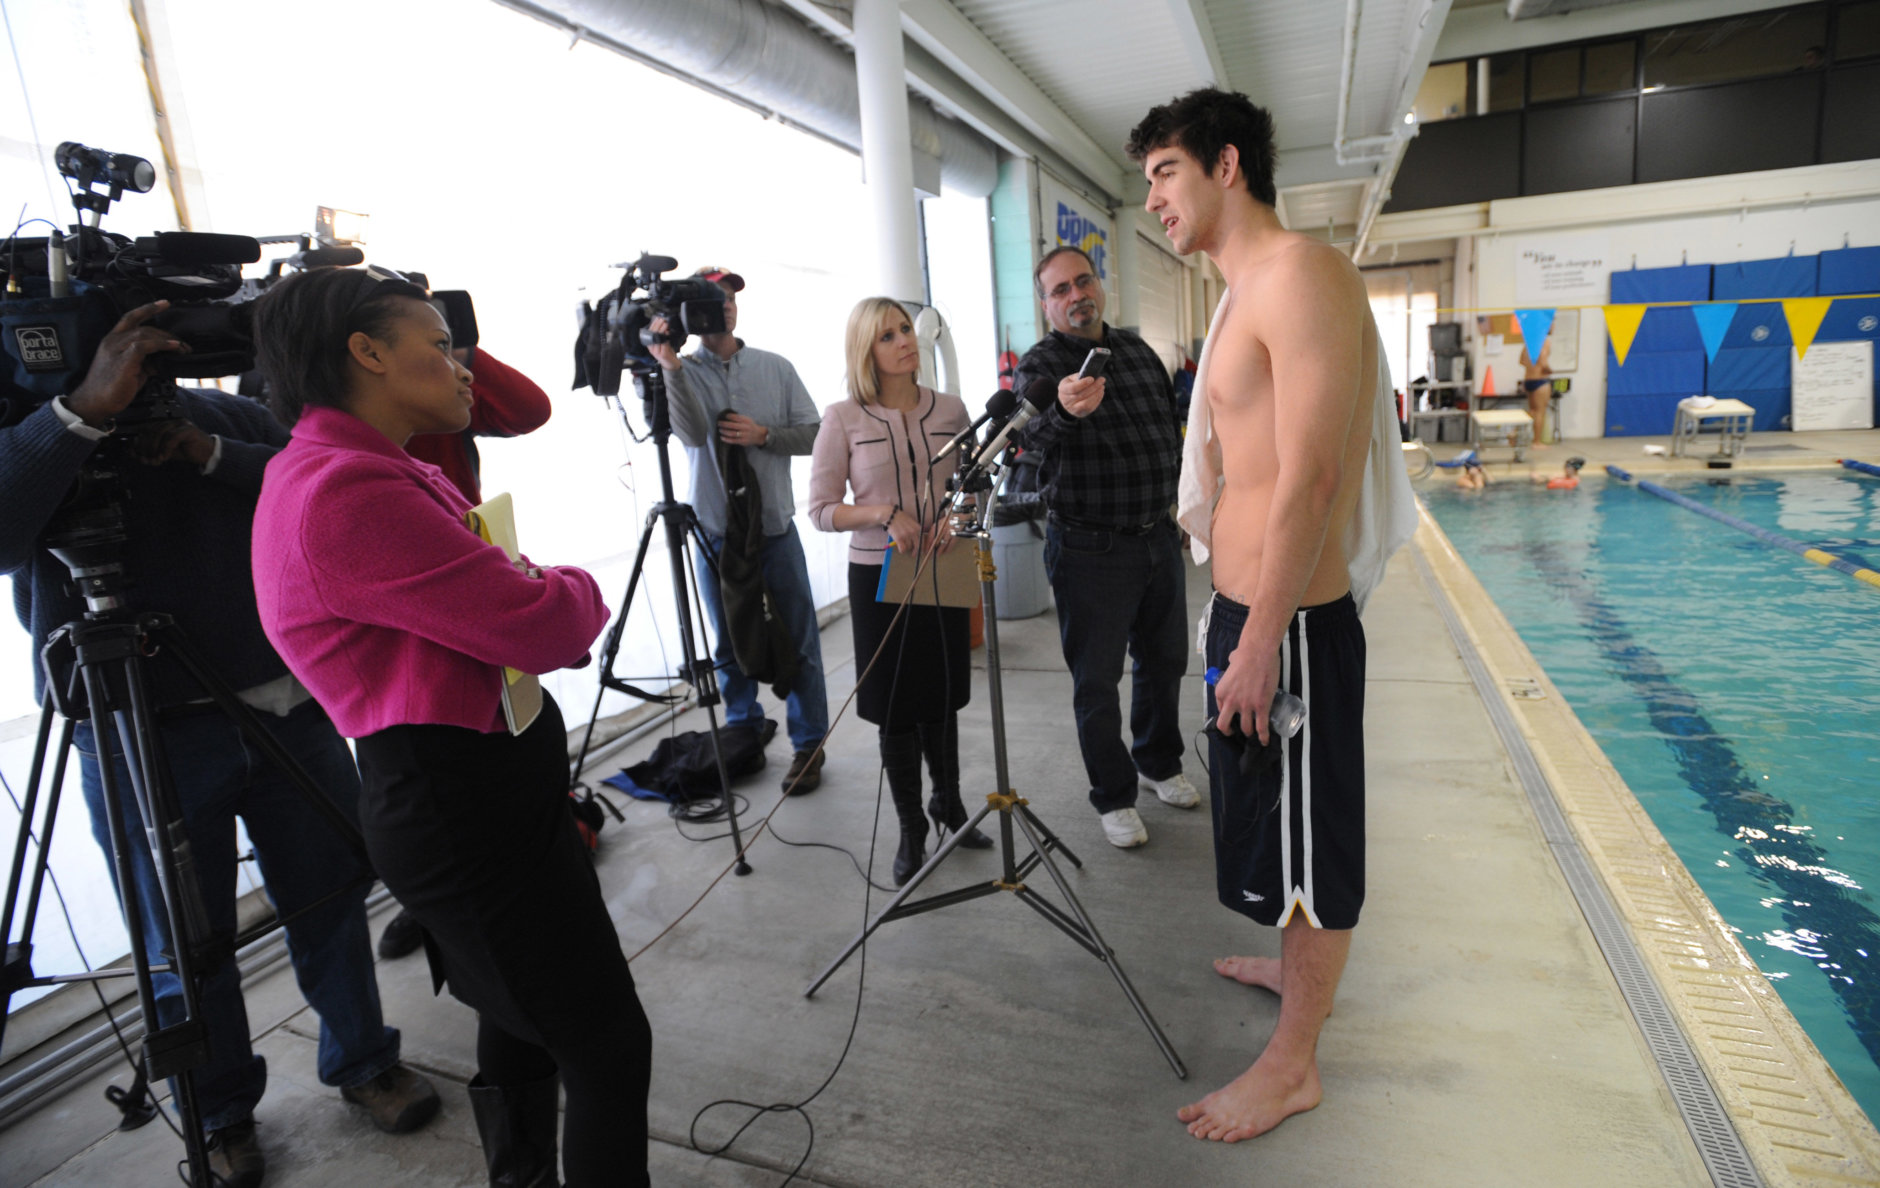 Olympic gold medalist Michael Phelps answers questions from reporters before training at the Meadowbrook Aquatic Center, Friday, Feb. 6, 2009, in Baltimore. The swimming superstar has been suspended for three months and had his training stipend revoked by USA Swimming. (AP Photo/Gail Burton)